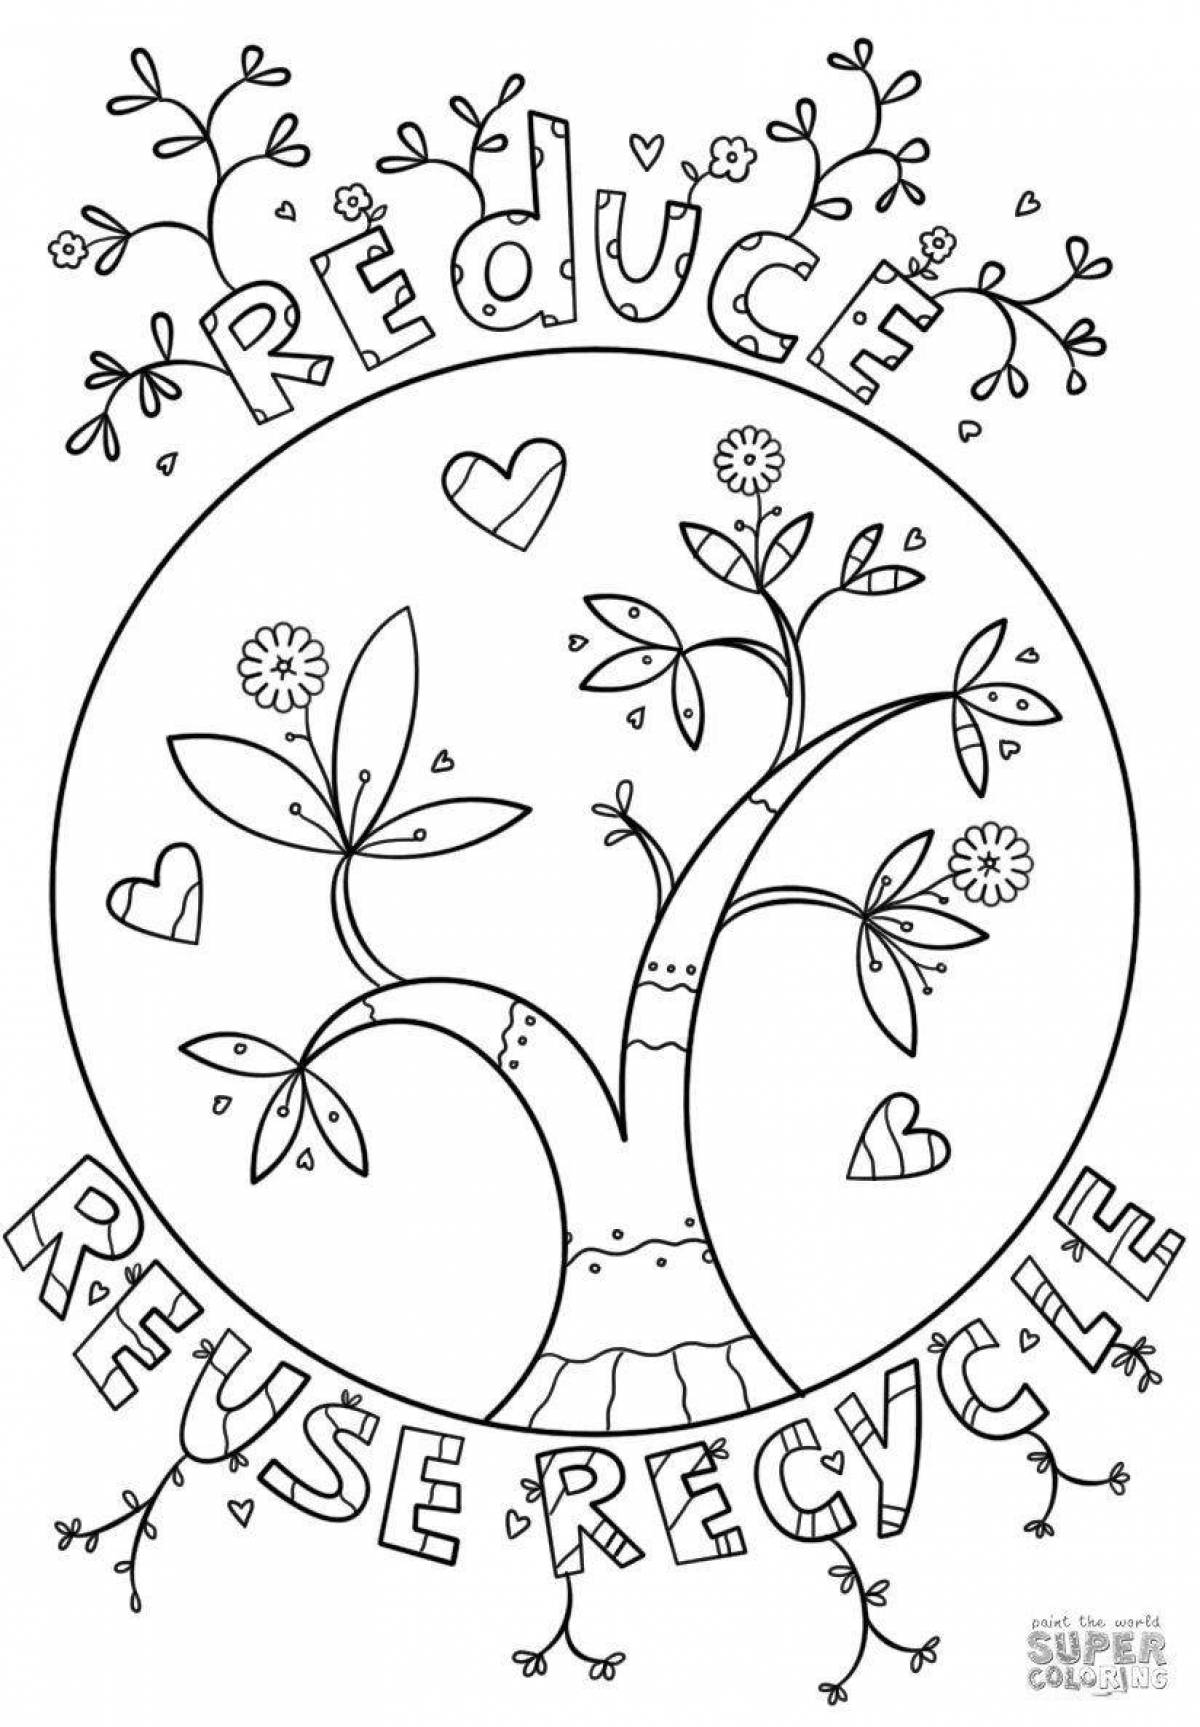 Great eco coloring book